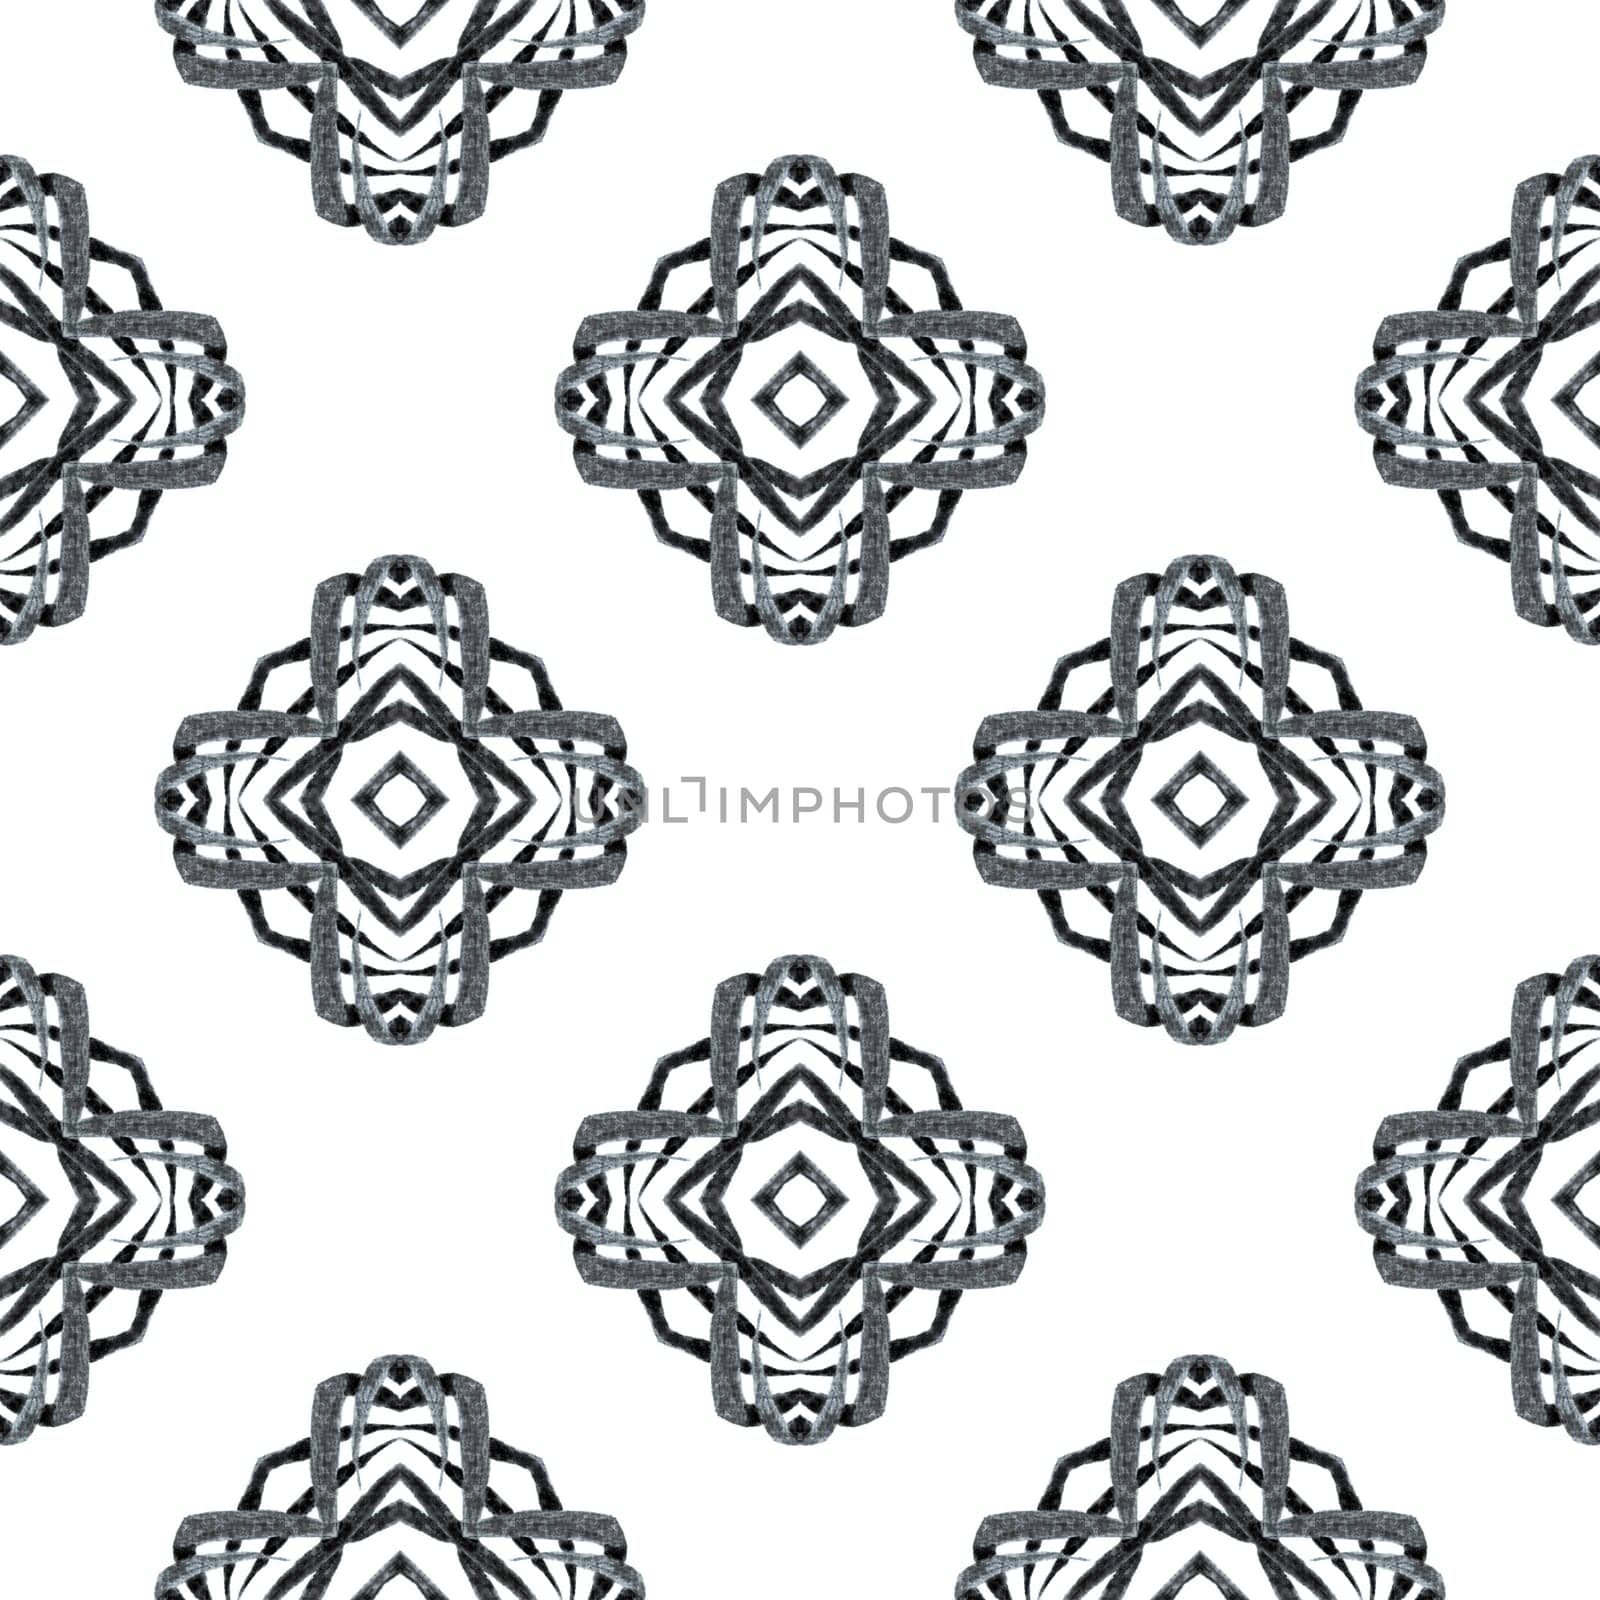 Striped hand drawn design. Black and white extraordinary boho chic summer design. Repeating striped hand drawn border. Textile ready optimal print, swimwear fabric, wallpaper, wrapping.